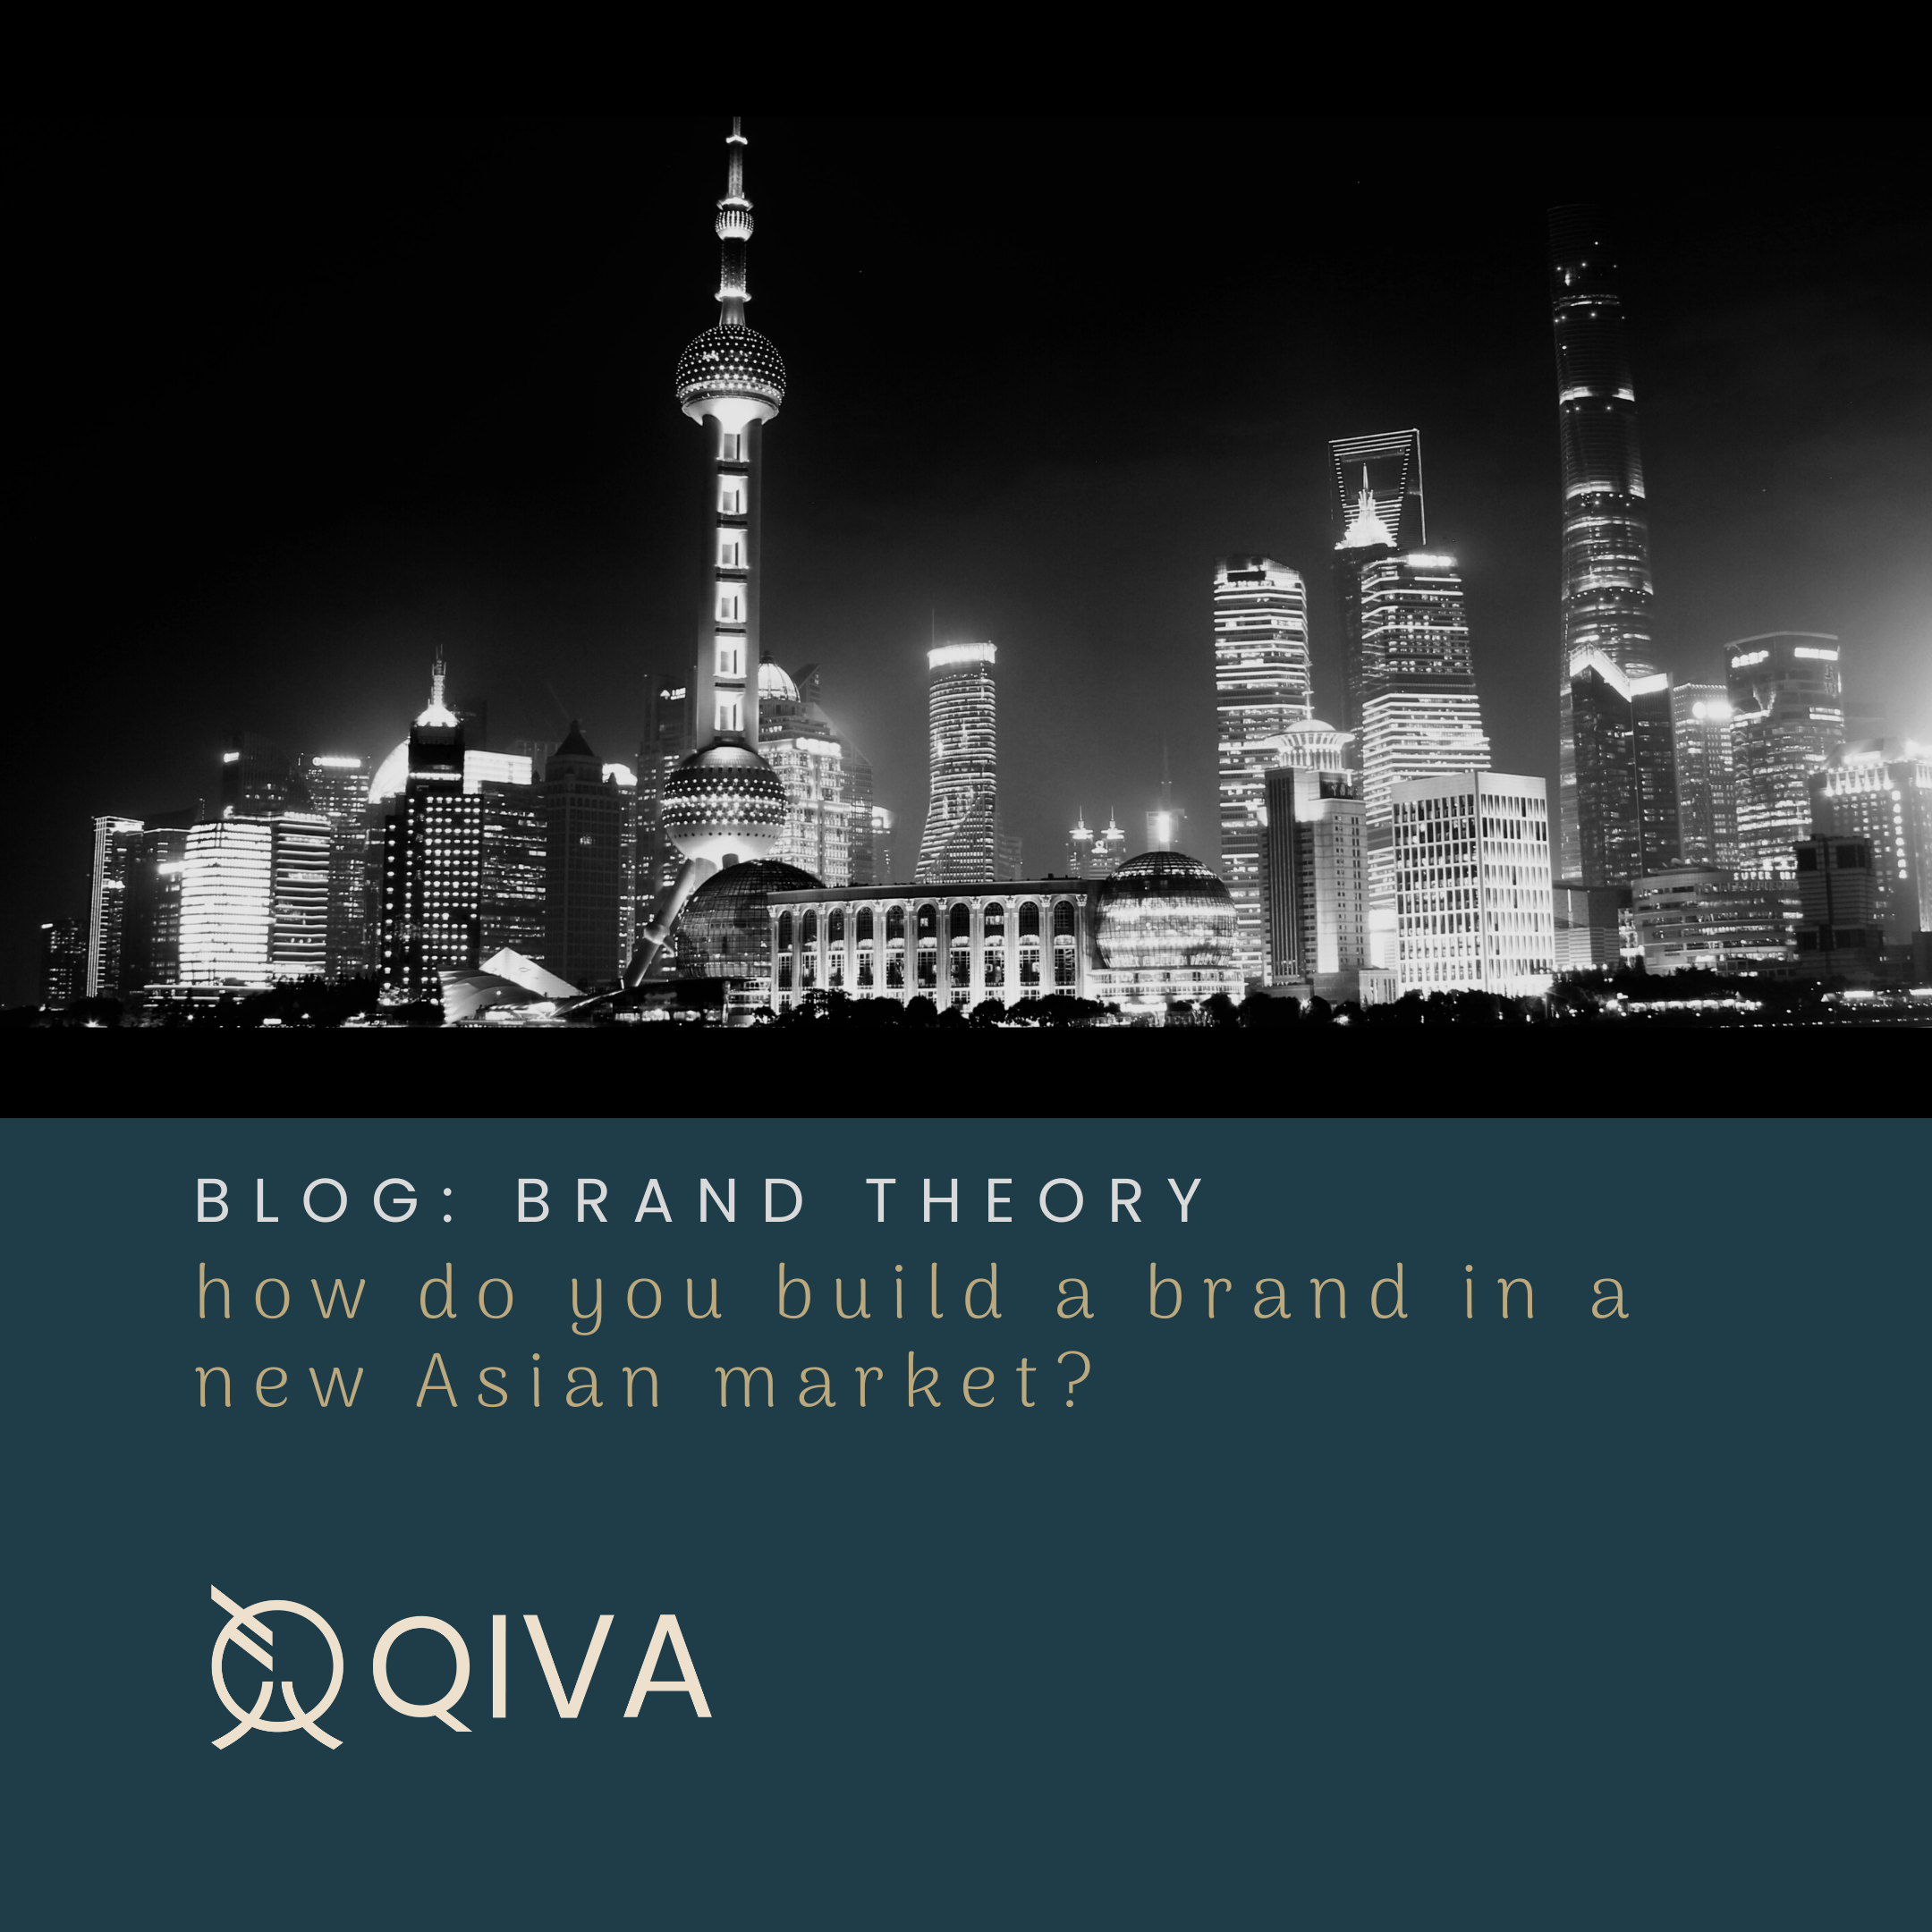 The power of brand theory: how do you build a brand in a new Asian market?